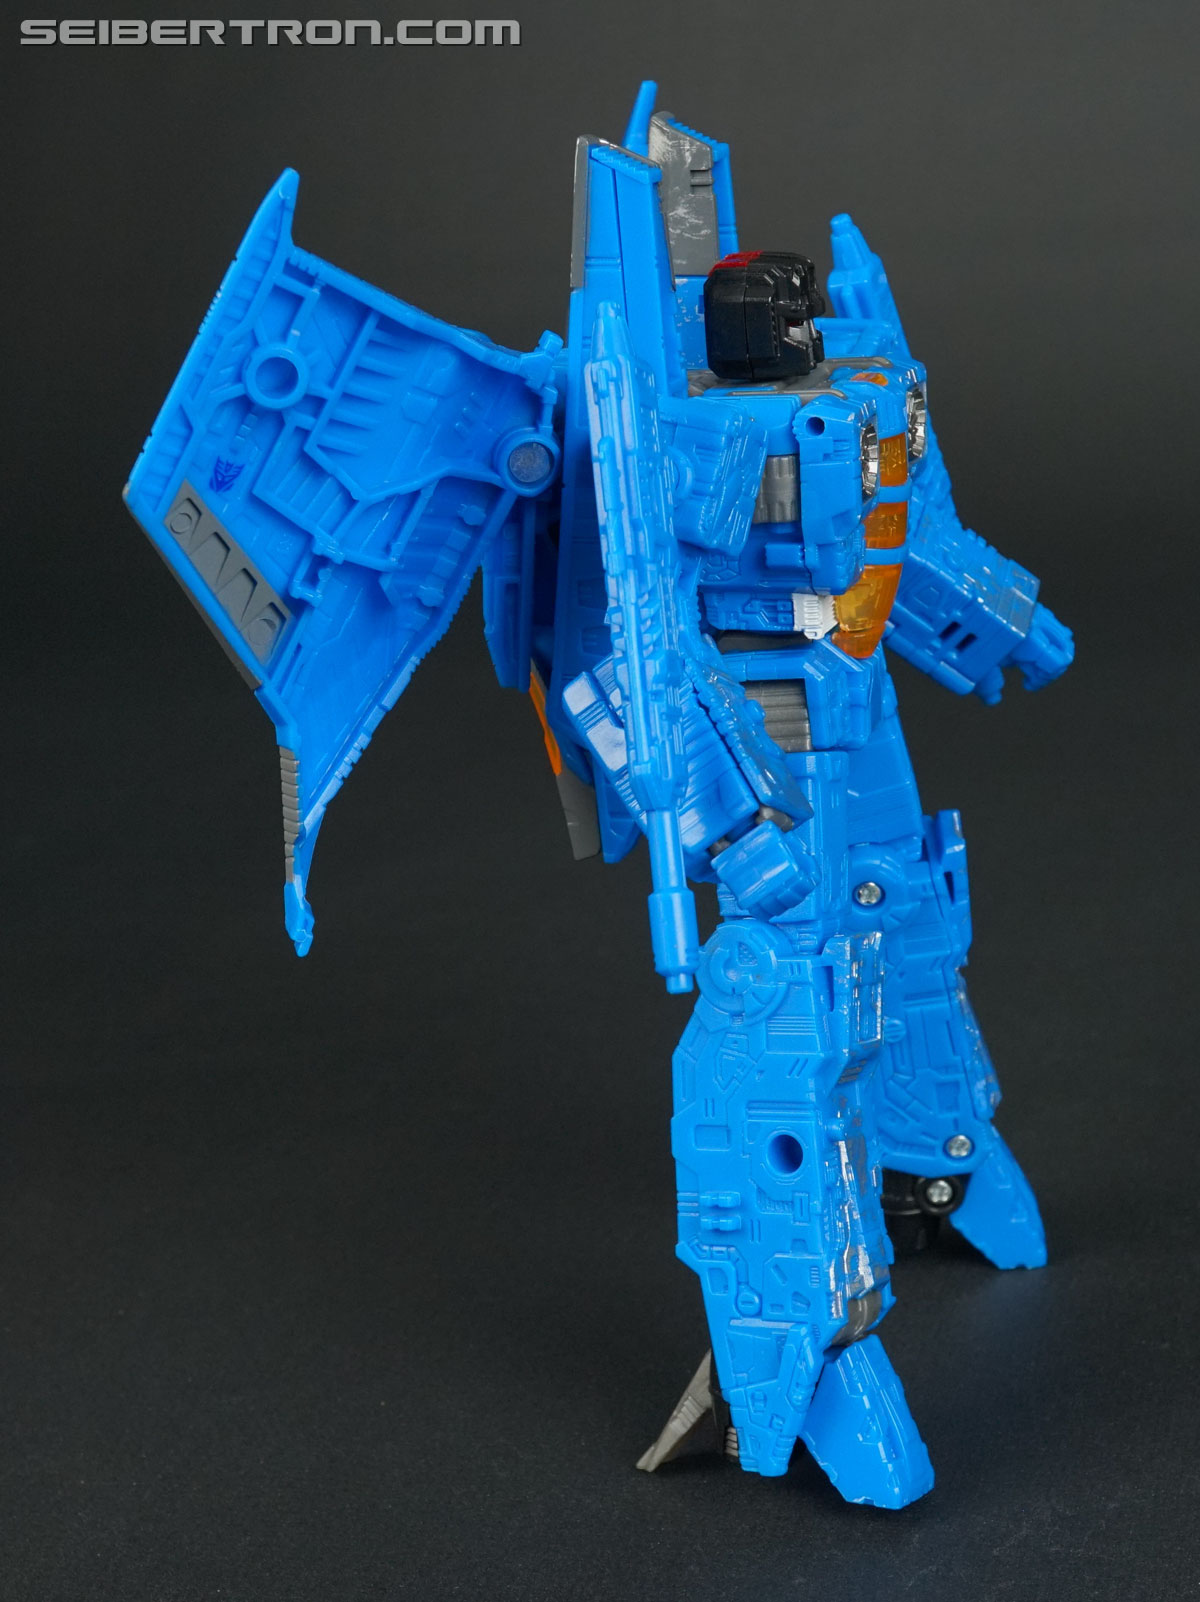 Transformers War for Cybertron: SIEGE Ion Storm (Seeker Ion Storm) (Image #56 of 111)